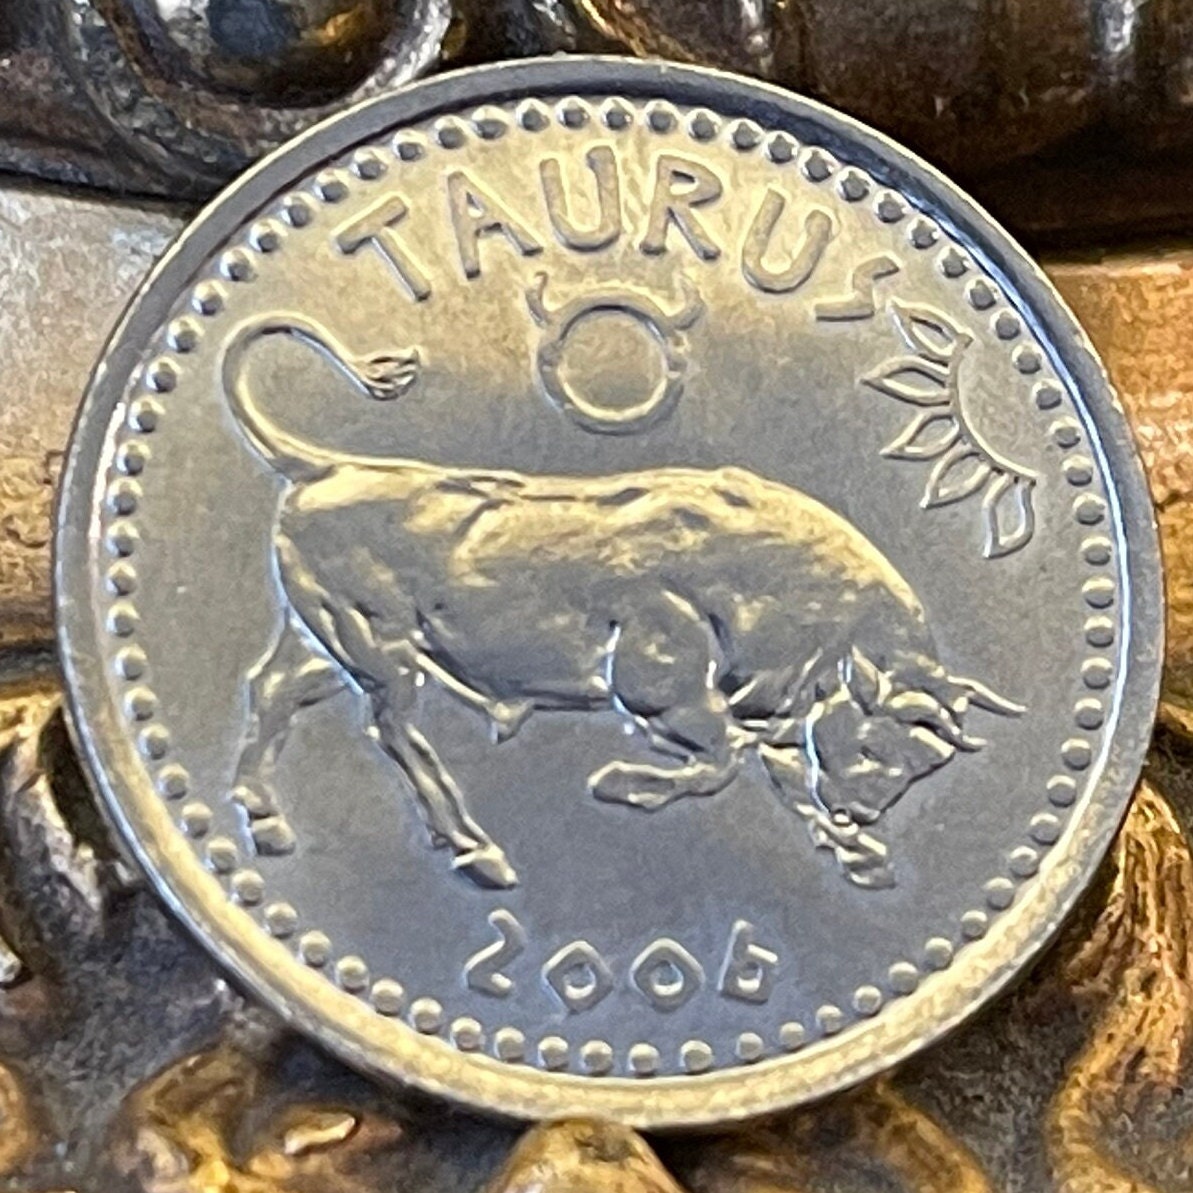 Taurus the Bull 10 Shillings Somaliland Authentic Coin Money for Jewelry and Craft Making (Zodiac Series) (Astrology) Bull of Heaven